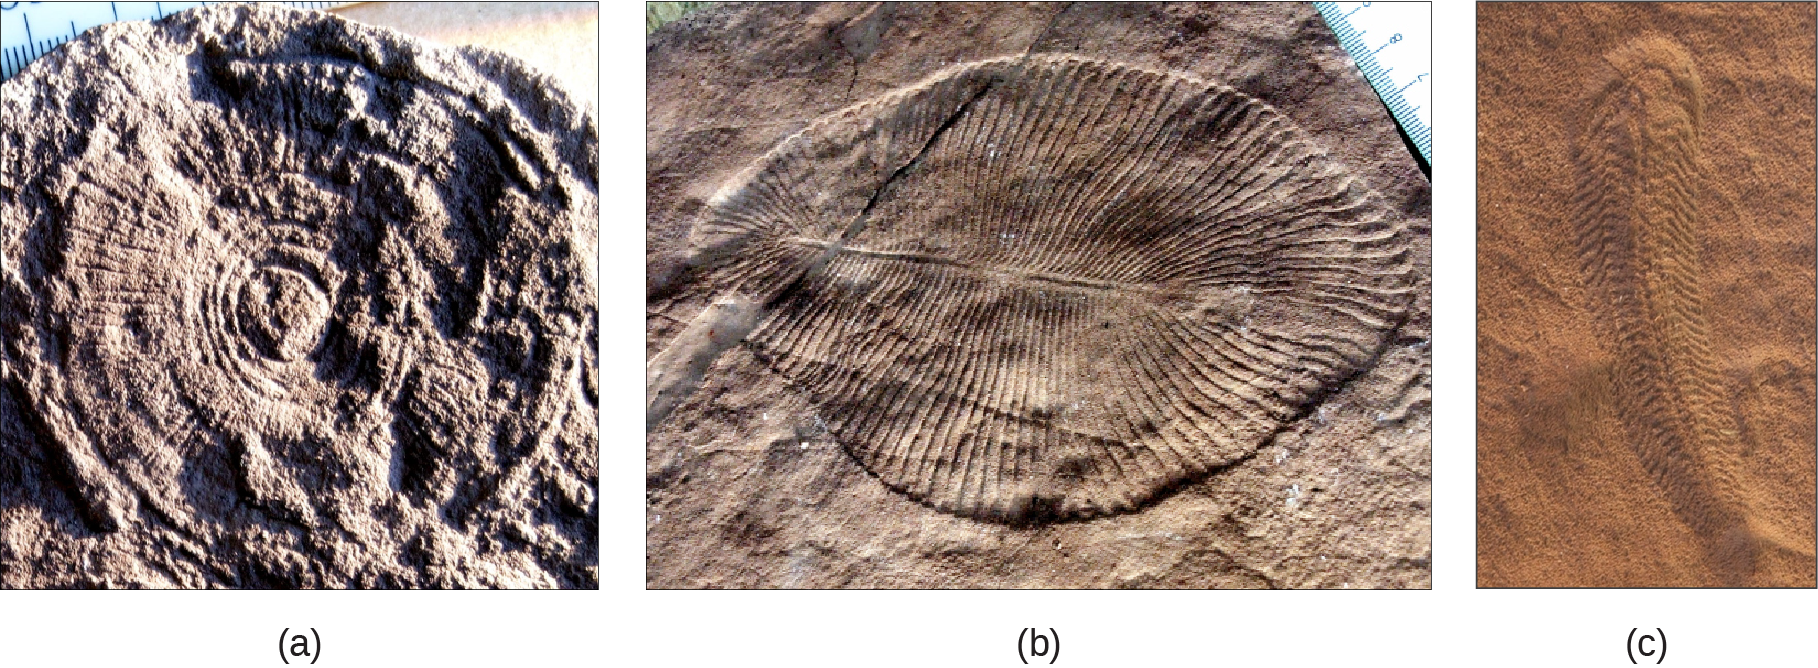 Part a shows a fossil that resembles a wheel, with spokes radiating out from the center, imprinted on a rock. Part b shows a fossil that resembles a teardrop shaped leaf, with grooves radiating out from a central rib. Part c shows a fossil that is much longer than it is wide, with many small ribs and a tail.